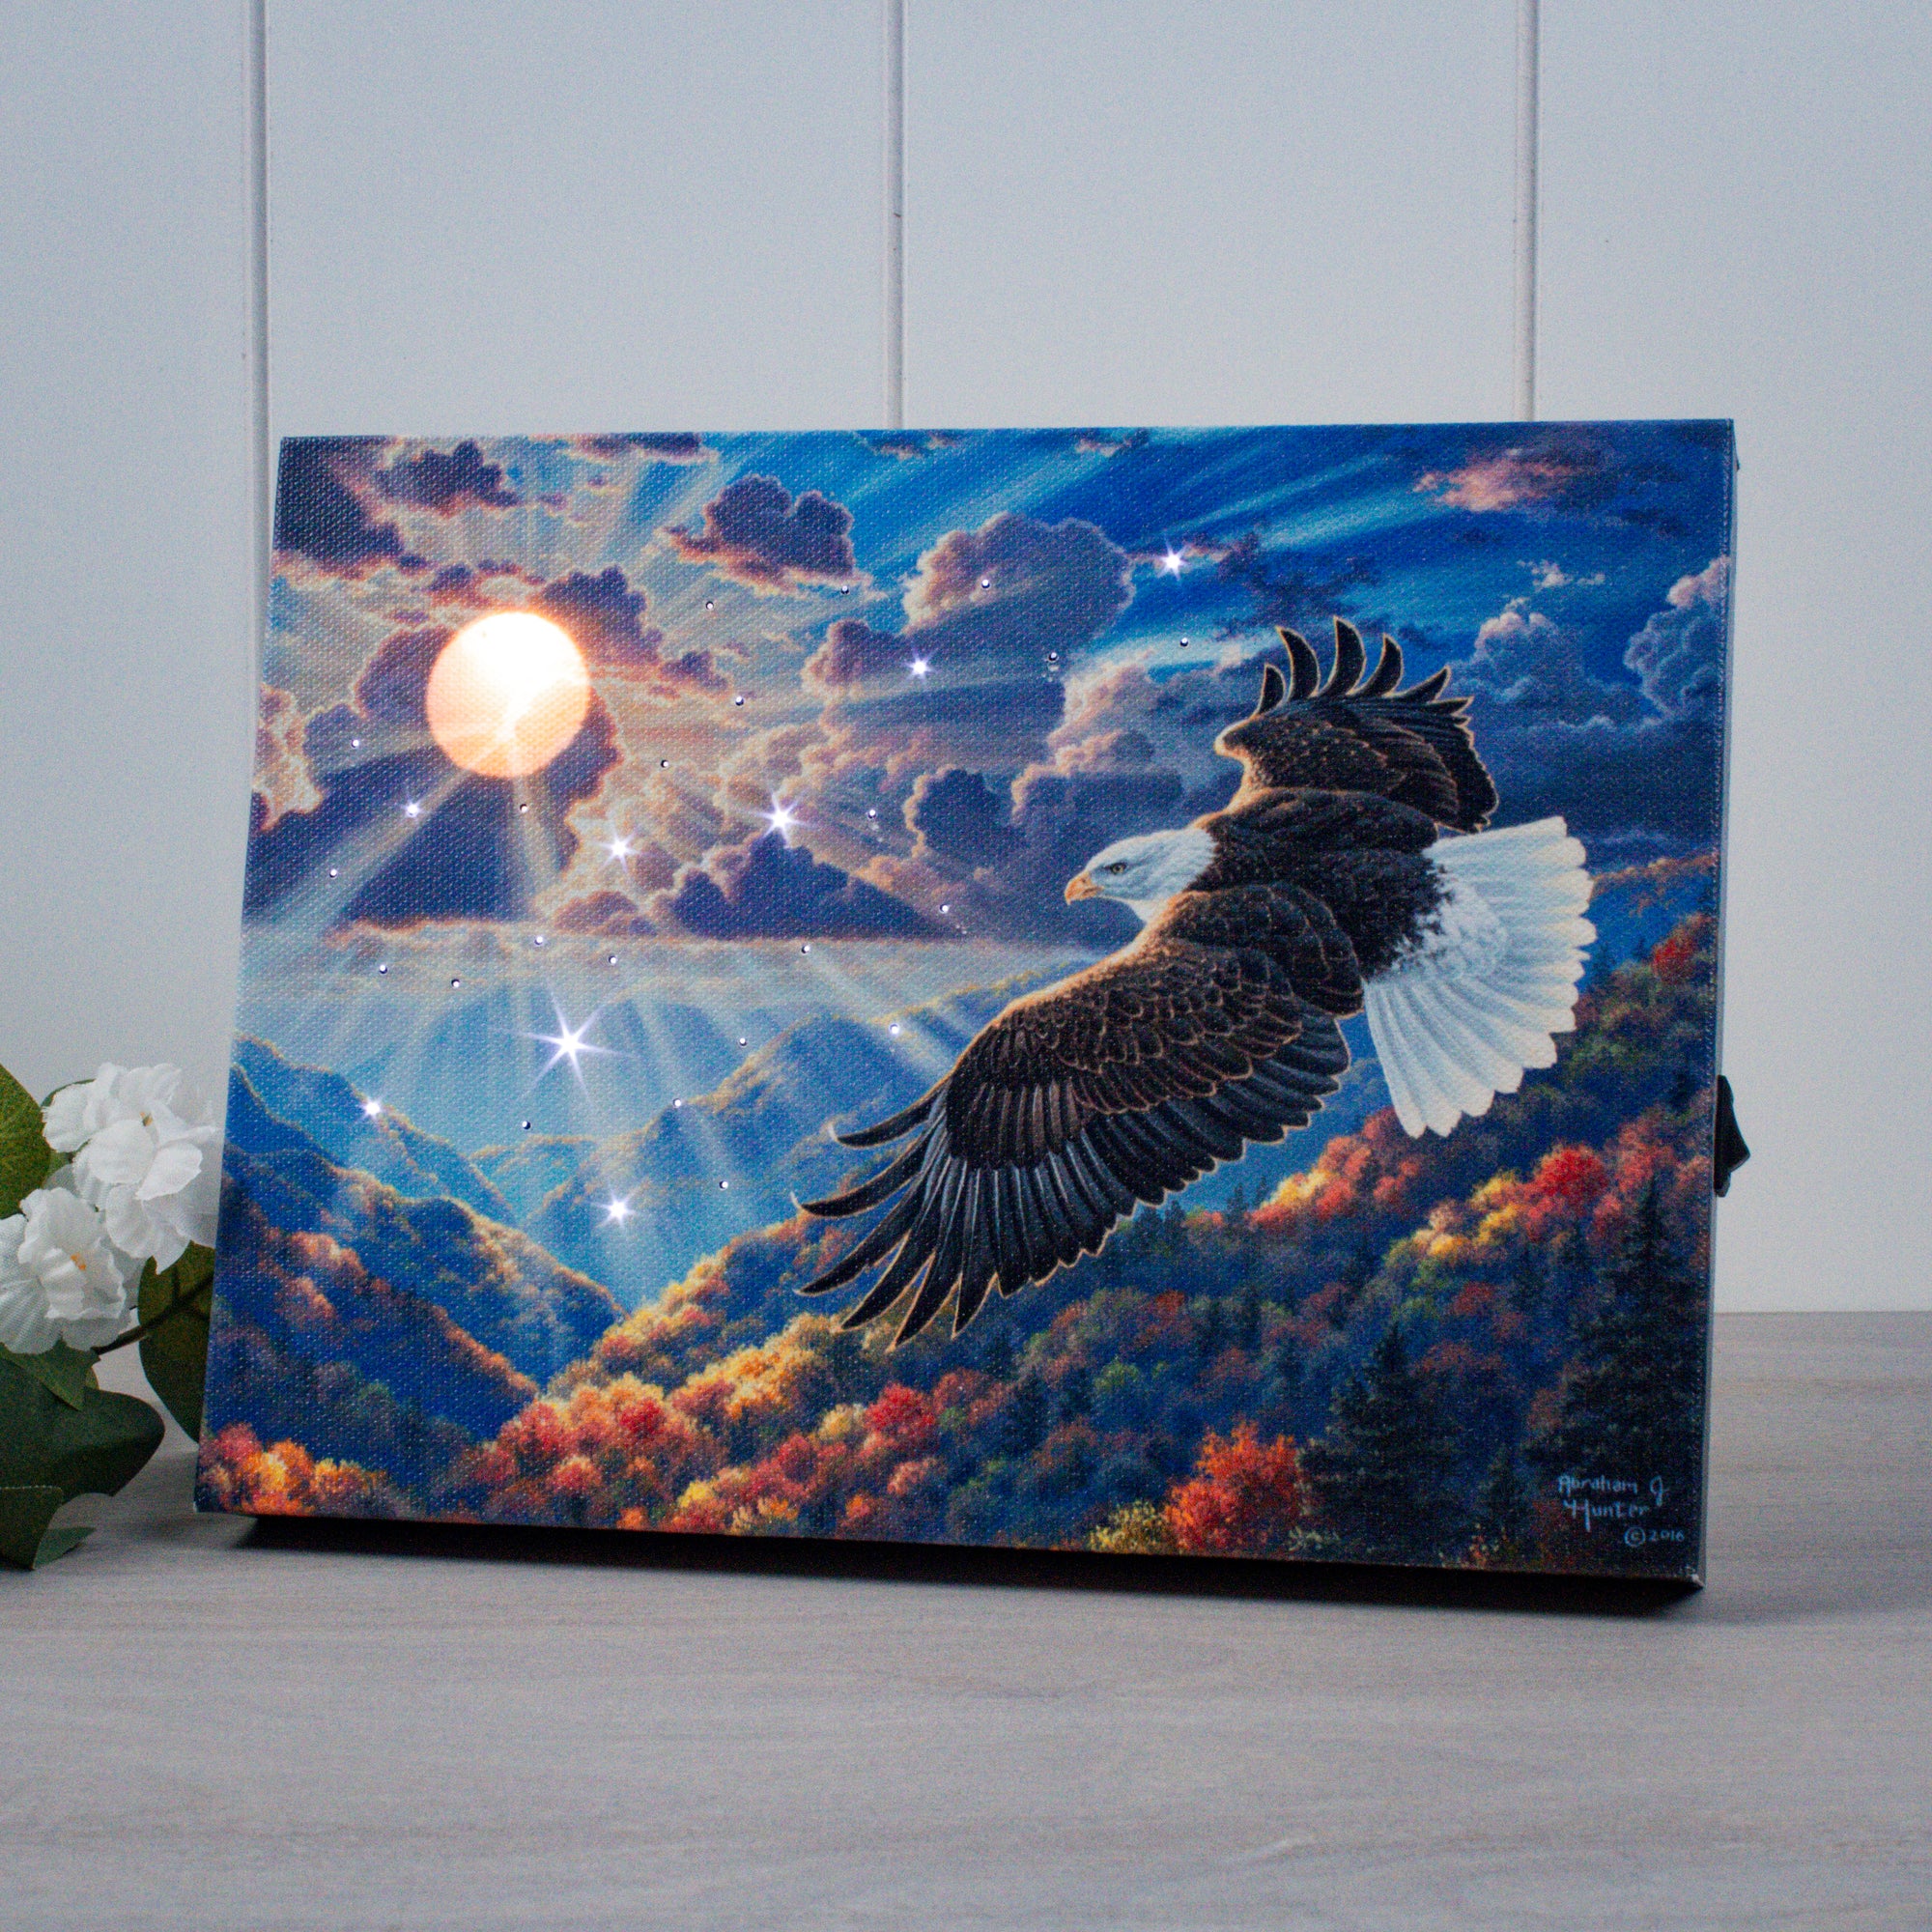 Freedom 8x6 Lighted Tabletop Canvas